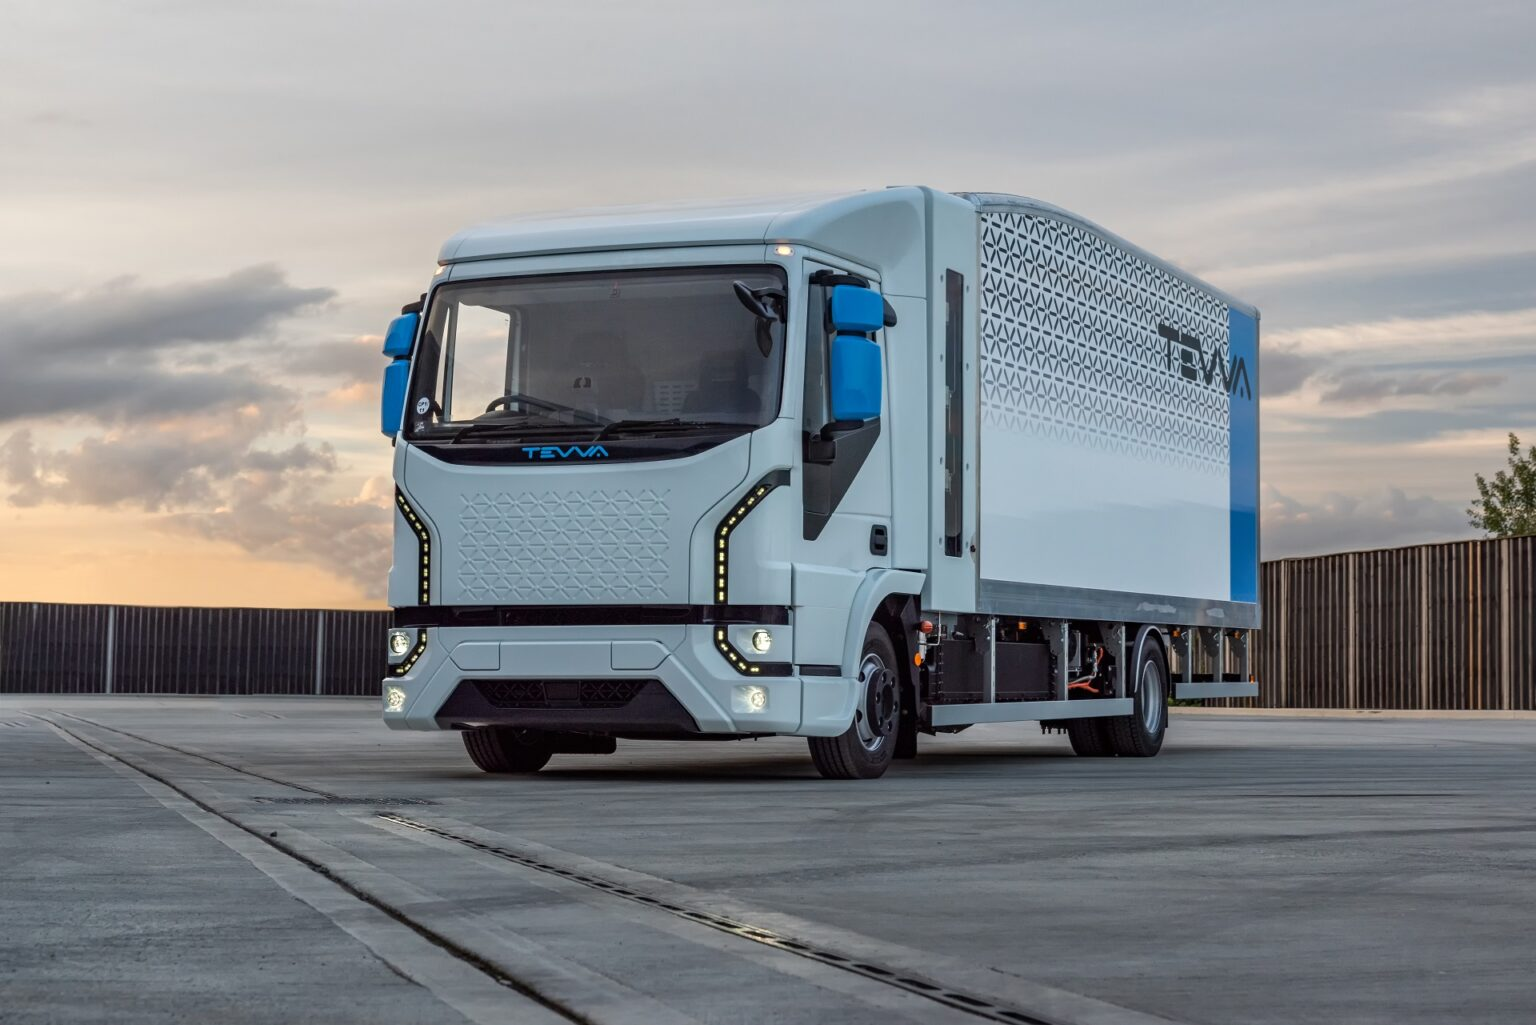 The UK gets its first hydrogen-electric truck with the landmark Tevva launch.